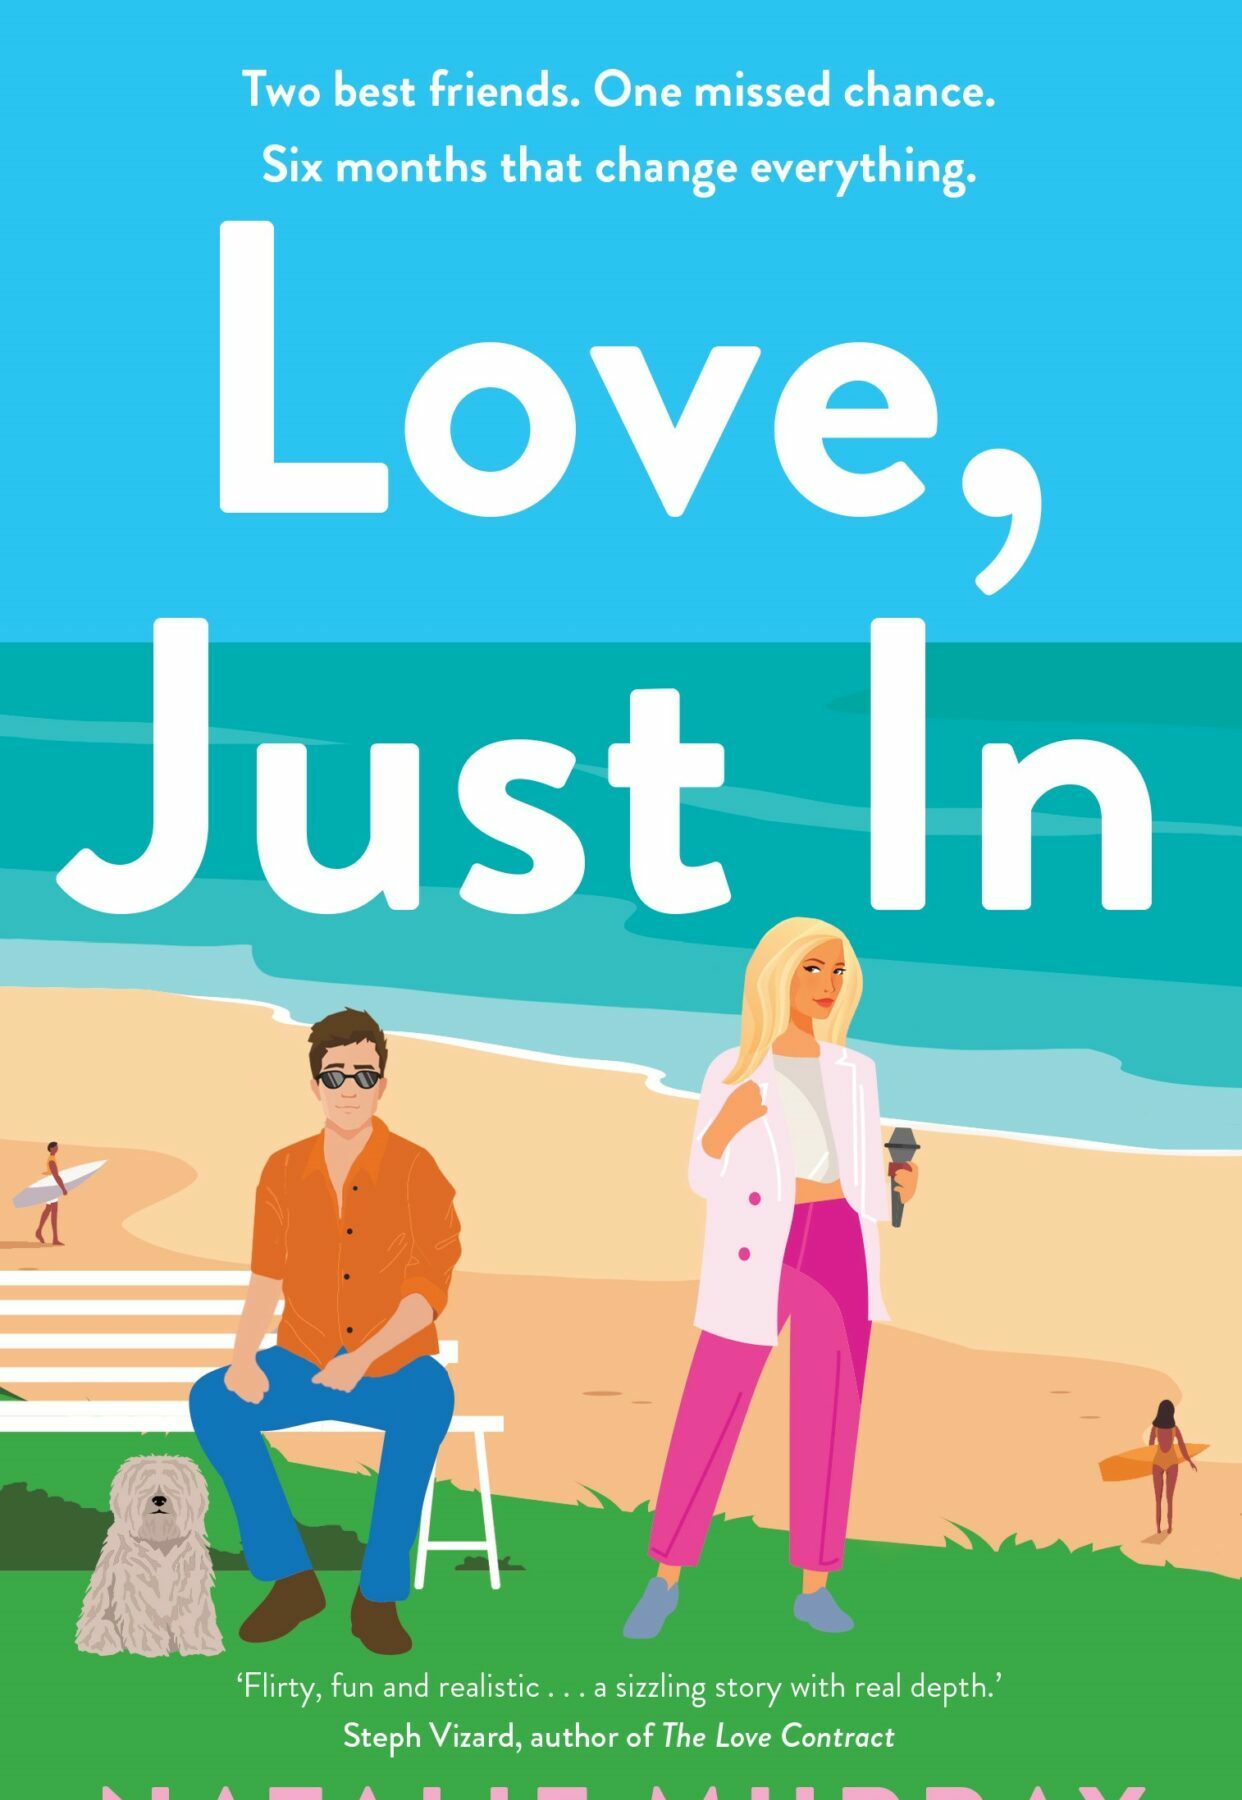 A book cover featuring an illustation of a man on a bench and woman walking past on grass in front of a beach and blue sky. The title is in white letters across the top half of the page